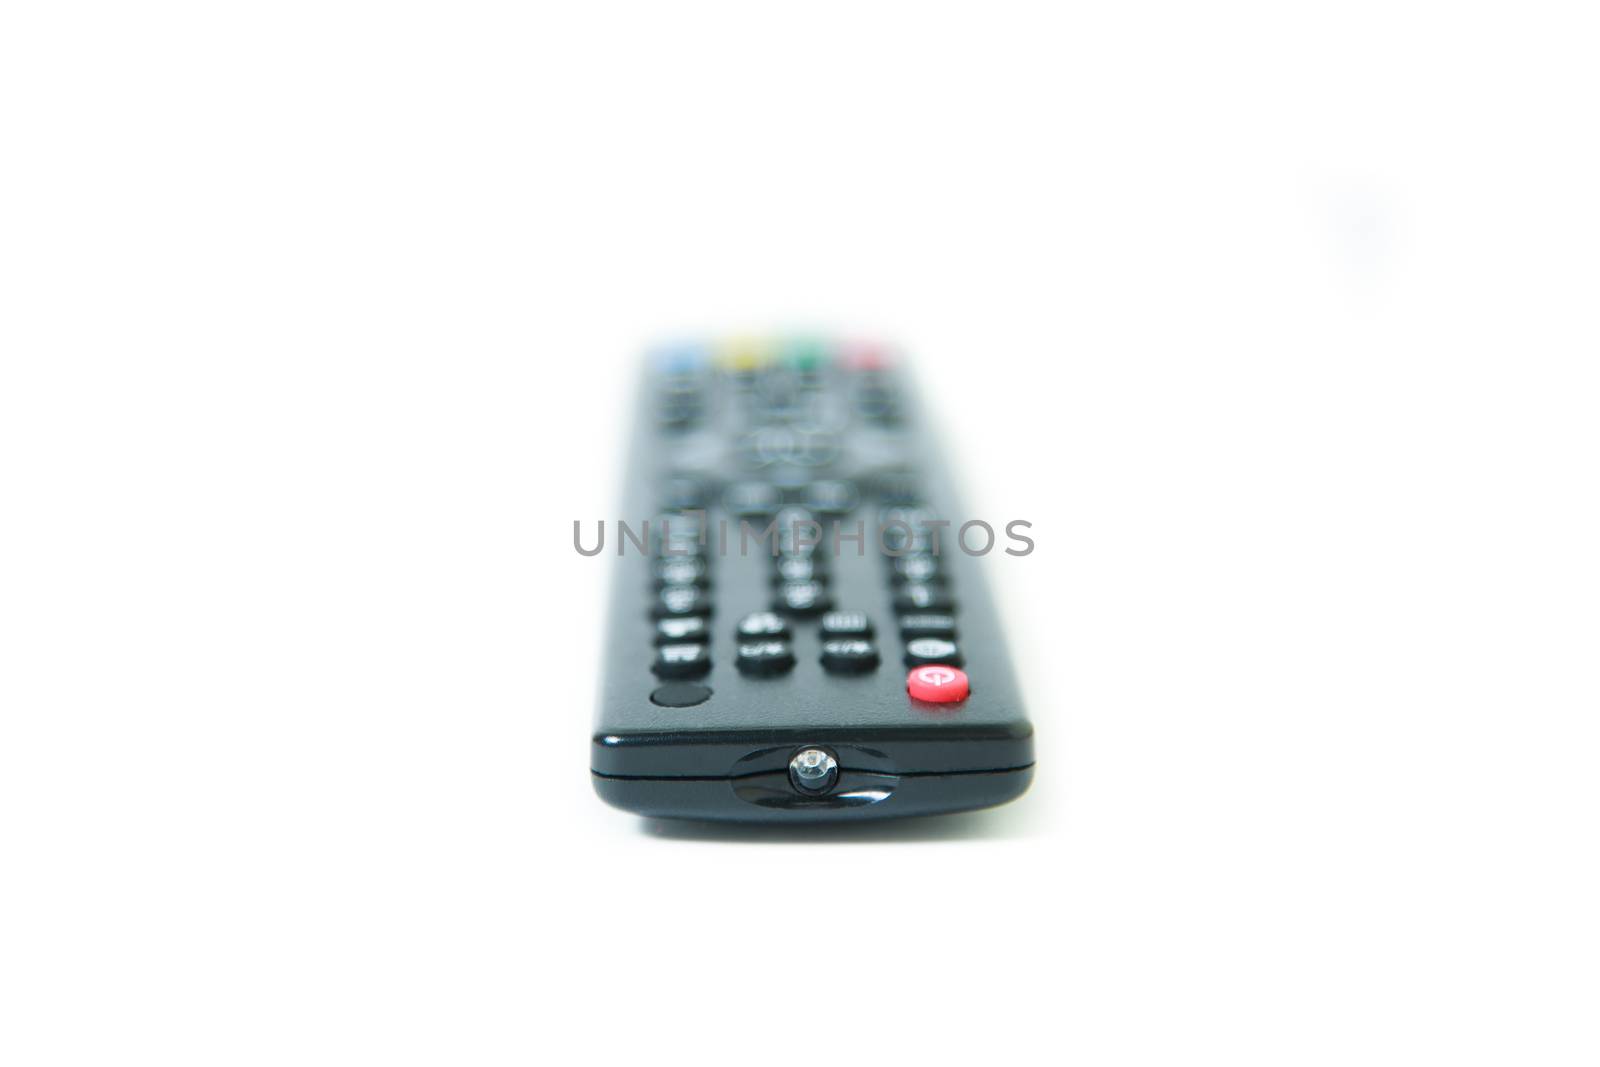 tv remote control on white background